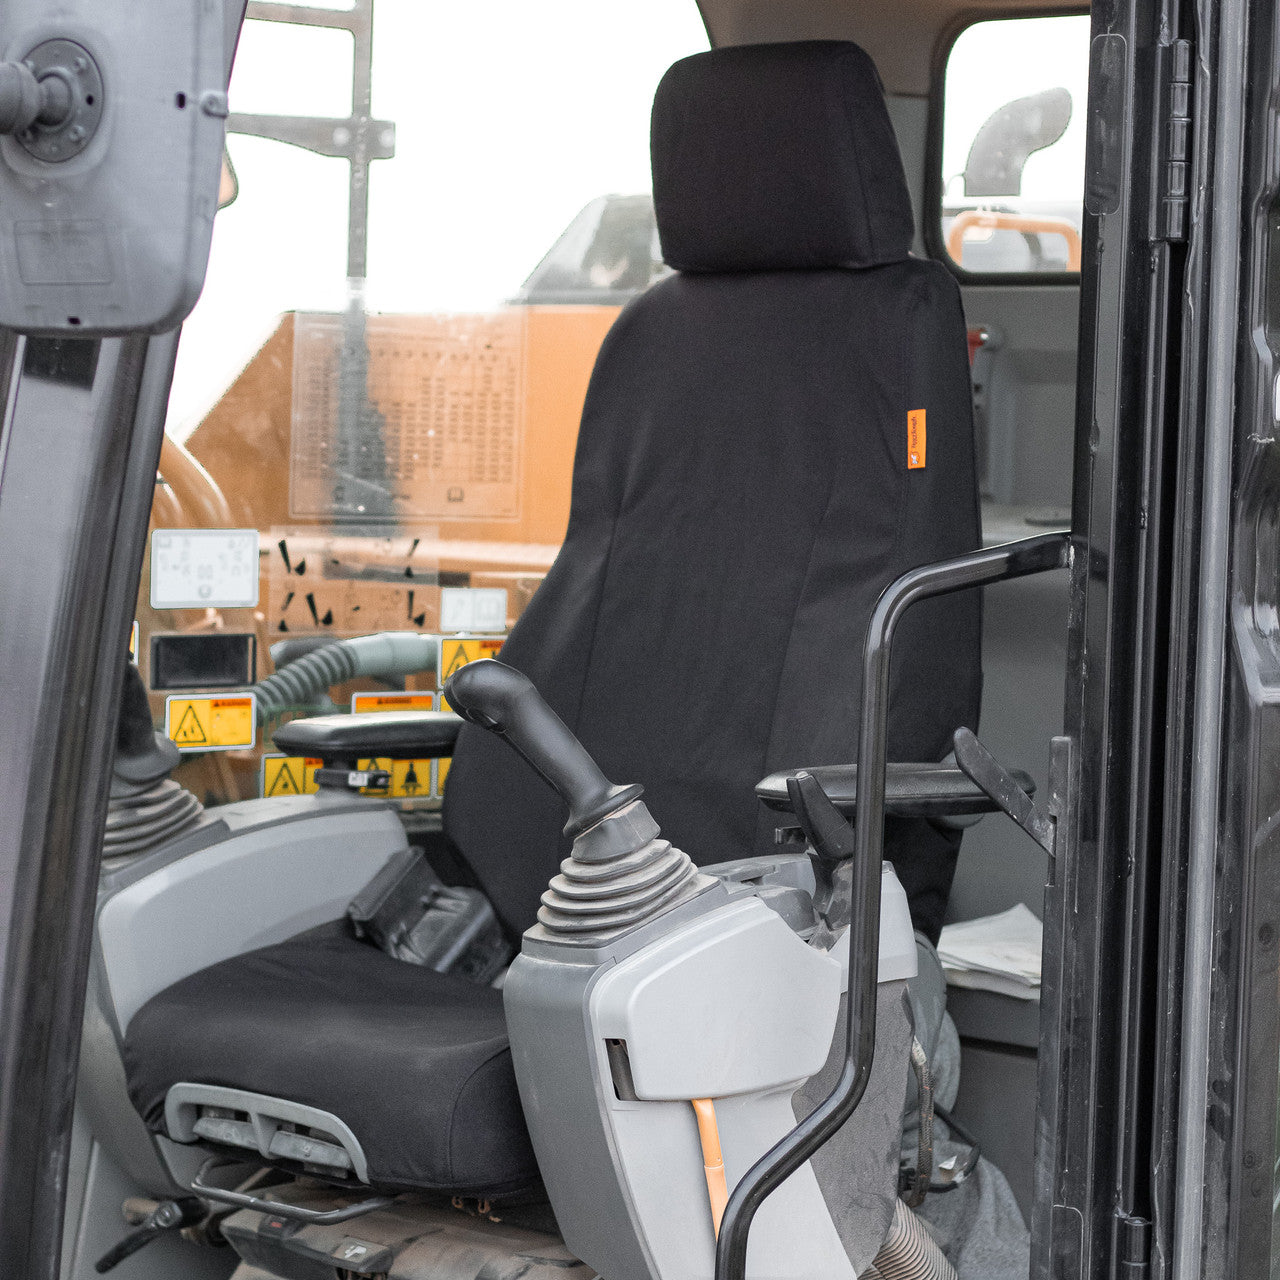 TigerTough seat cover for a CAT excavator